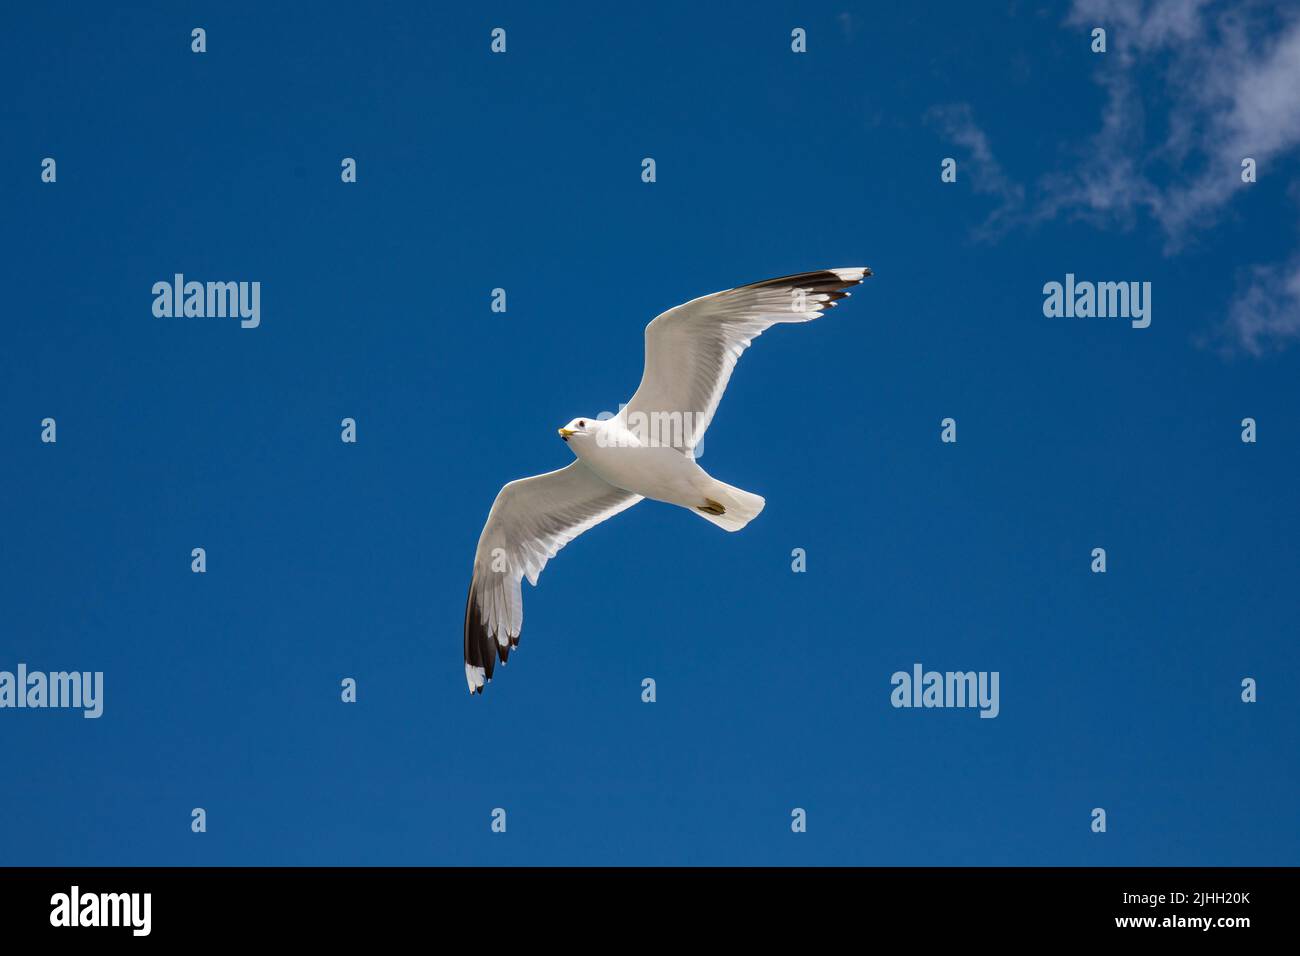 Low-angle view of common gull or Larus canus flying or gliding in the air Stock Photo